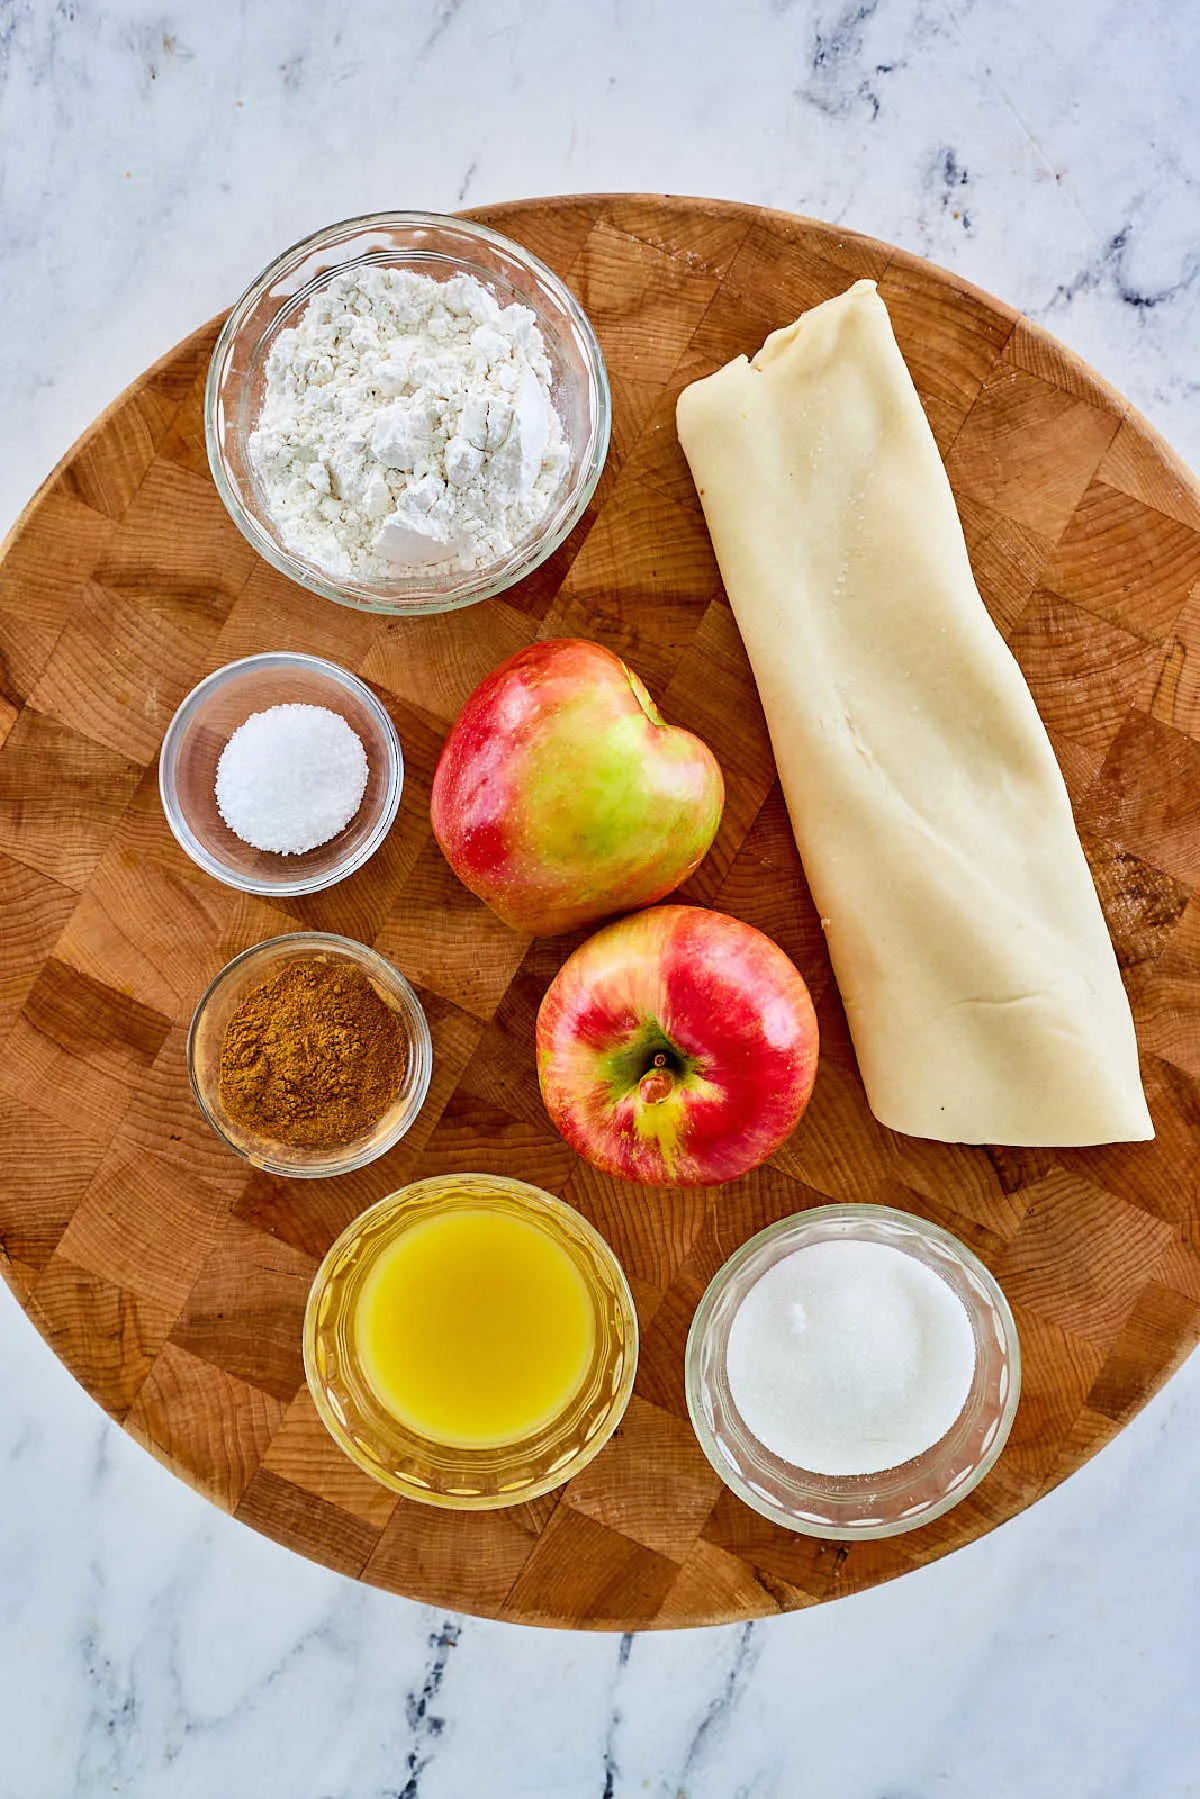 Ingredients including apples, orange juice, sugar, cinnamon, flour, and pastry ready to be made into a deep dish apple pie. 